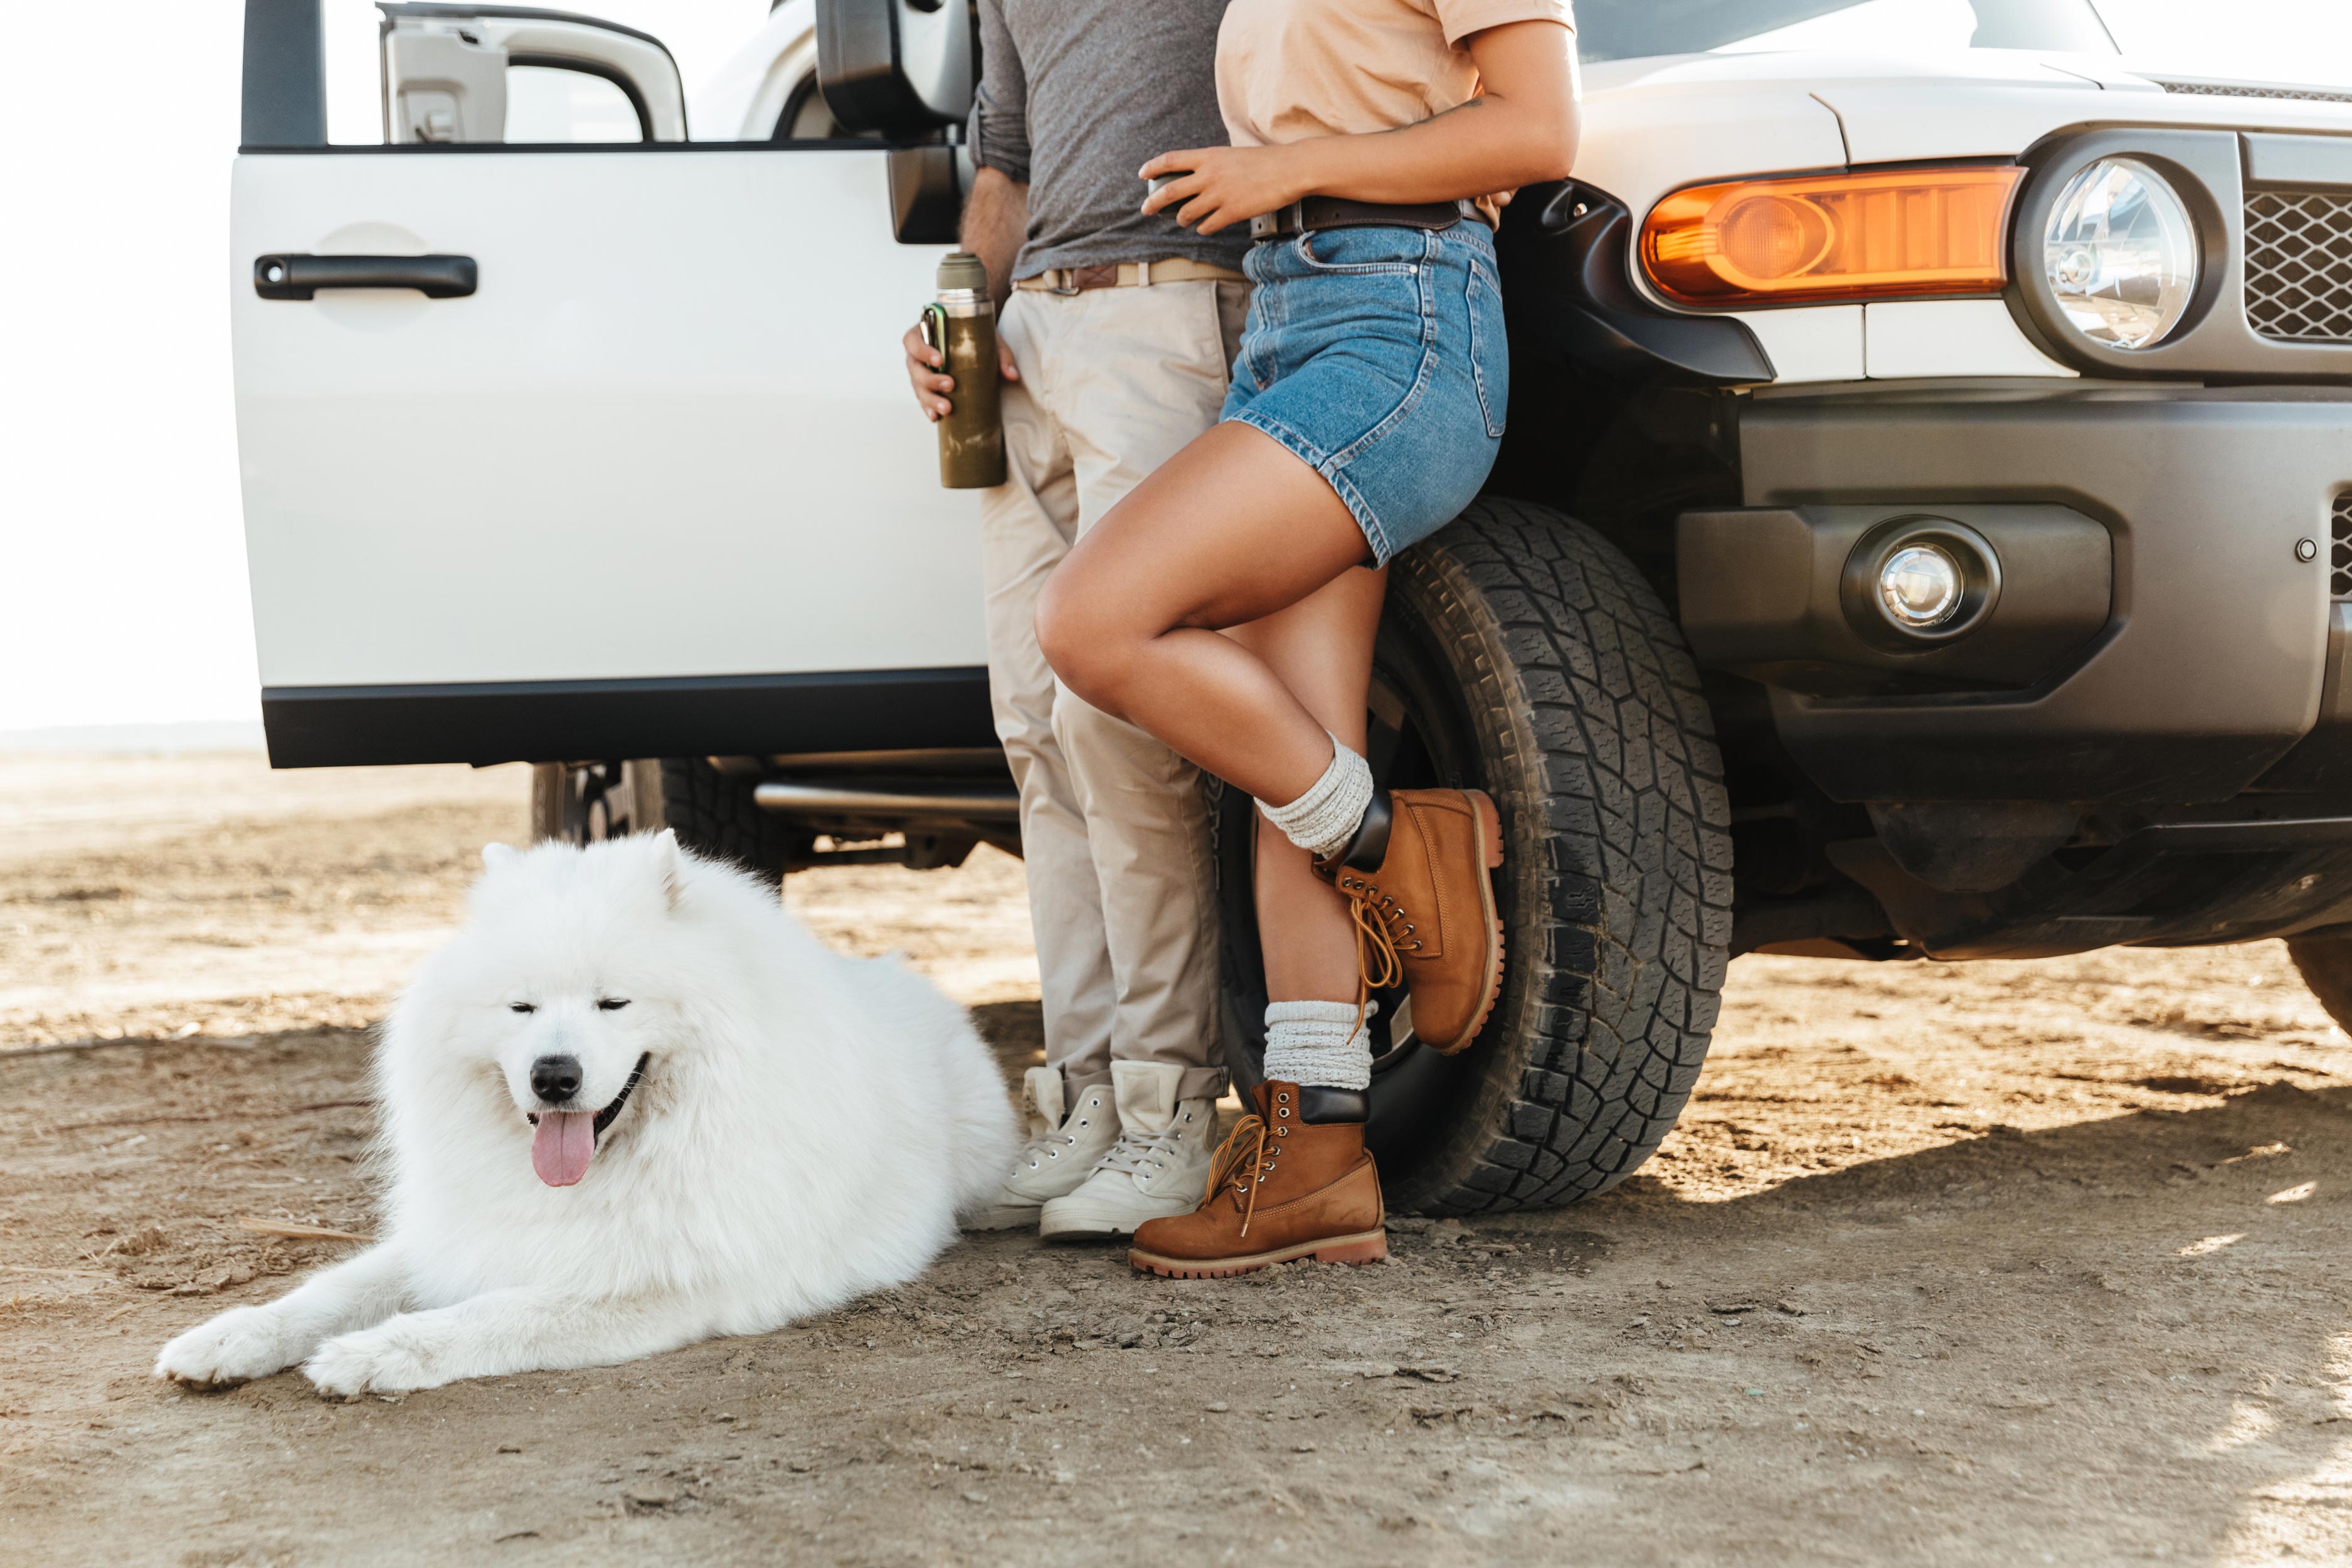 Couple at beach with dog and new car